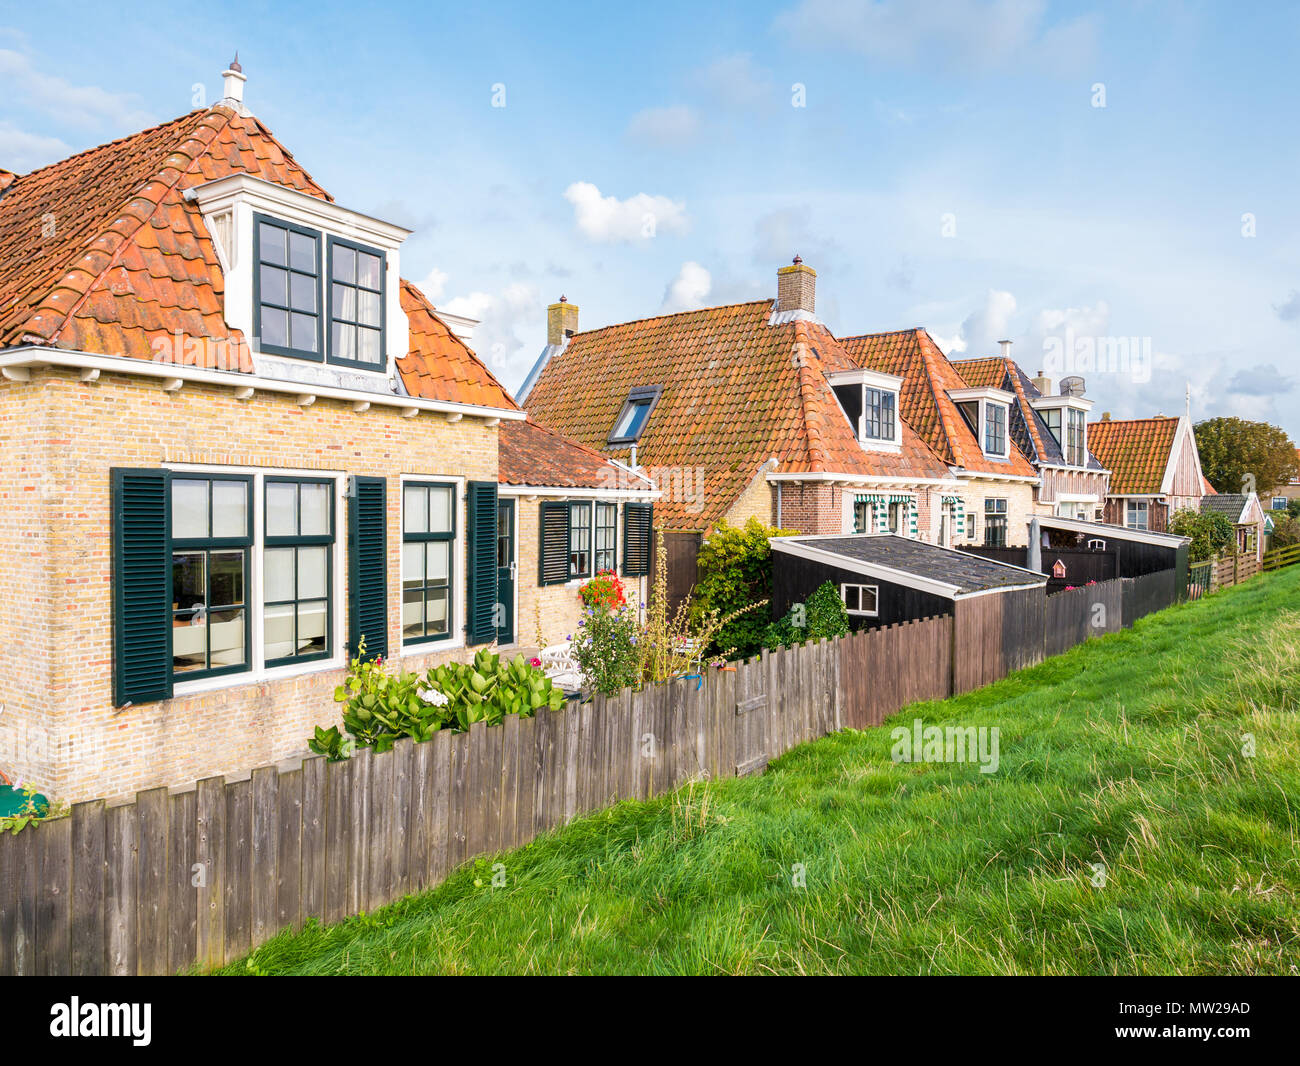 Small back yards of old cottages alongside dike in historic town of Makkum, Friesland, Netherlands Stock Photo